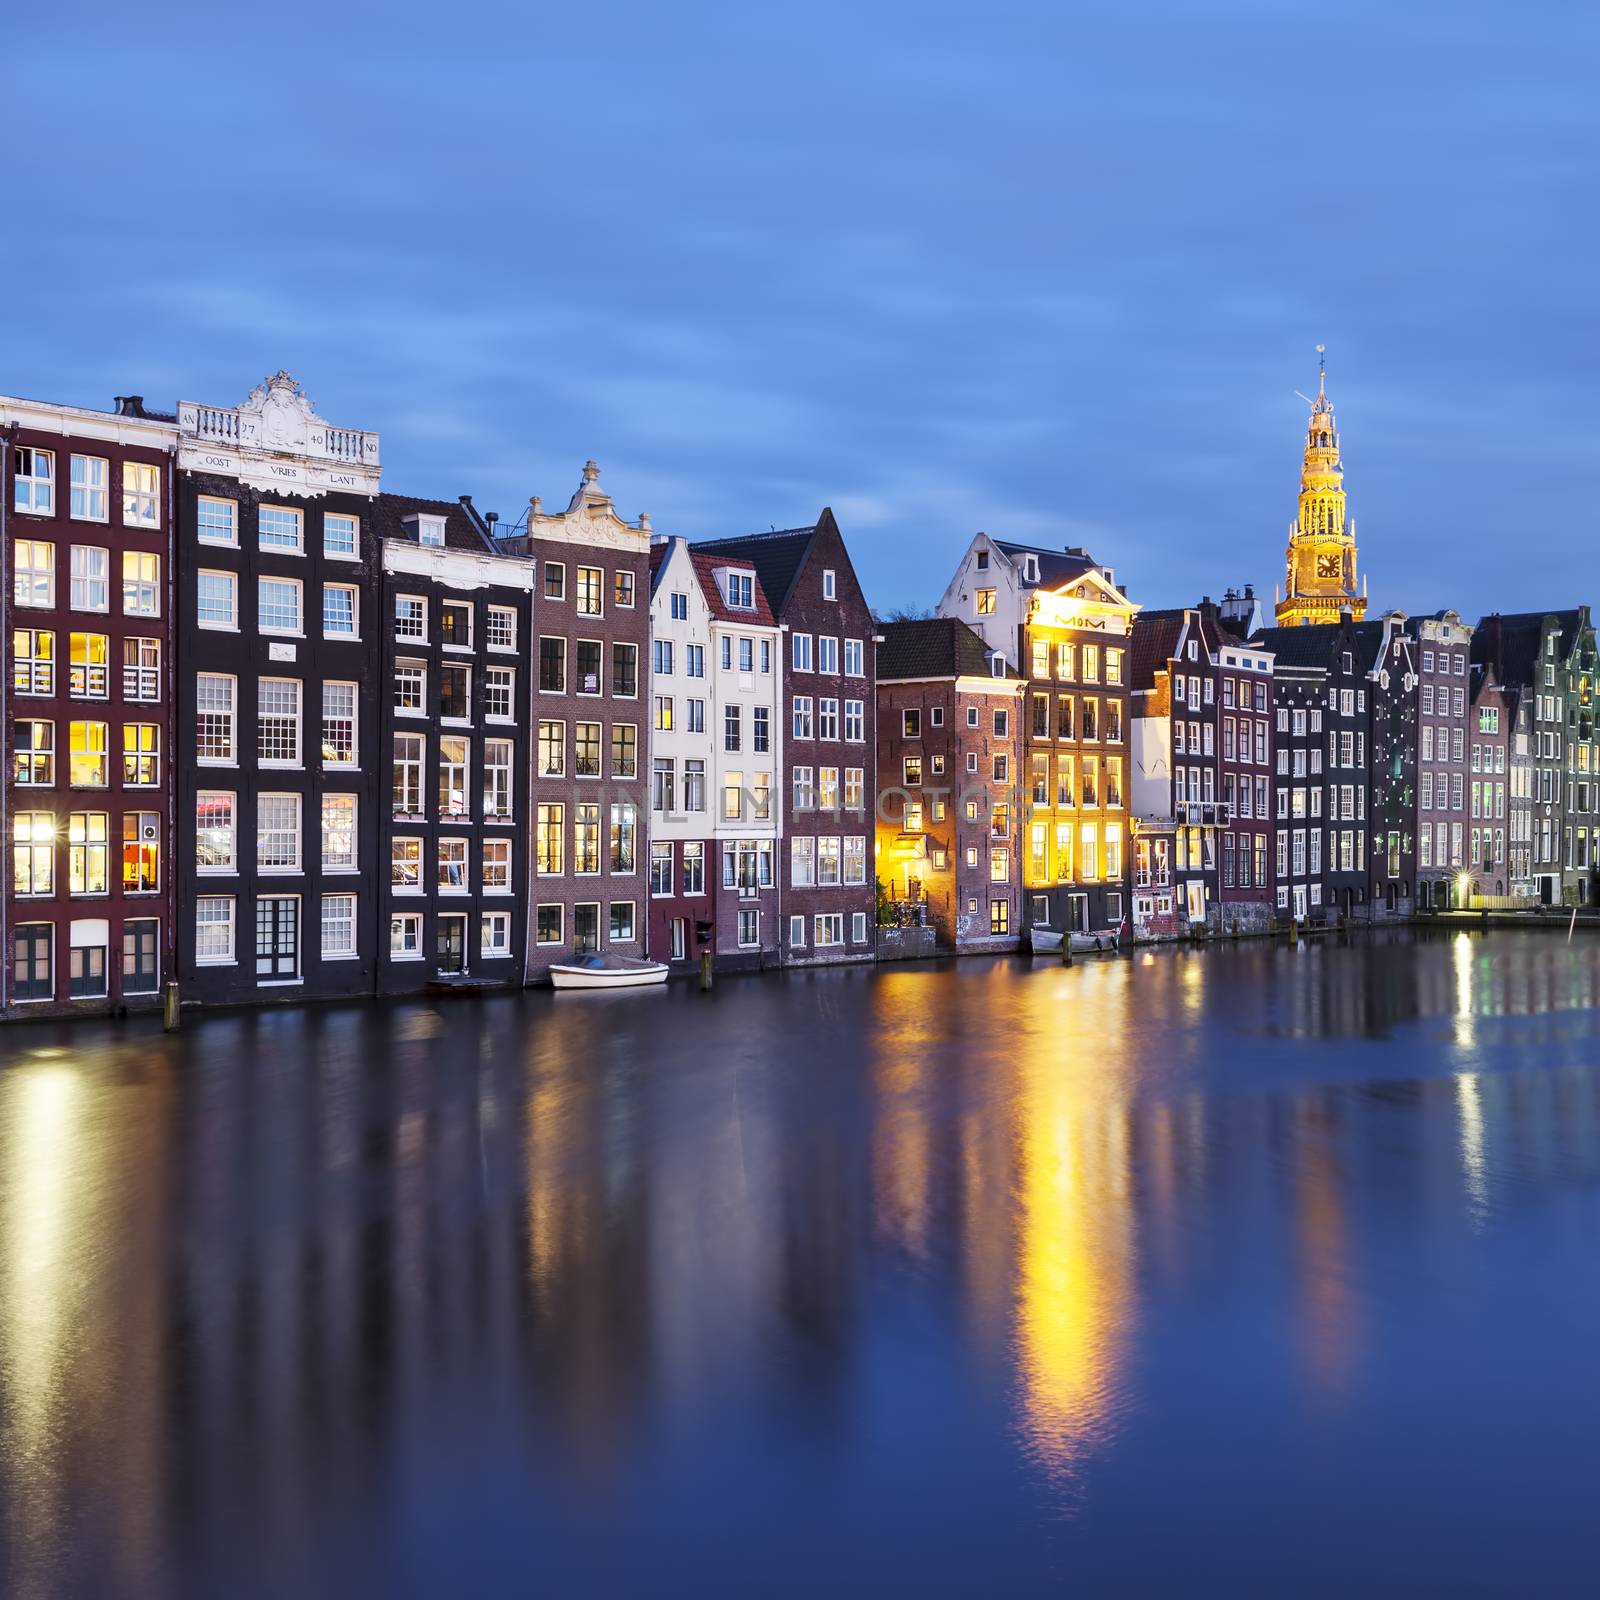 traditional old buildings in Amsterdam by night